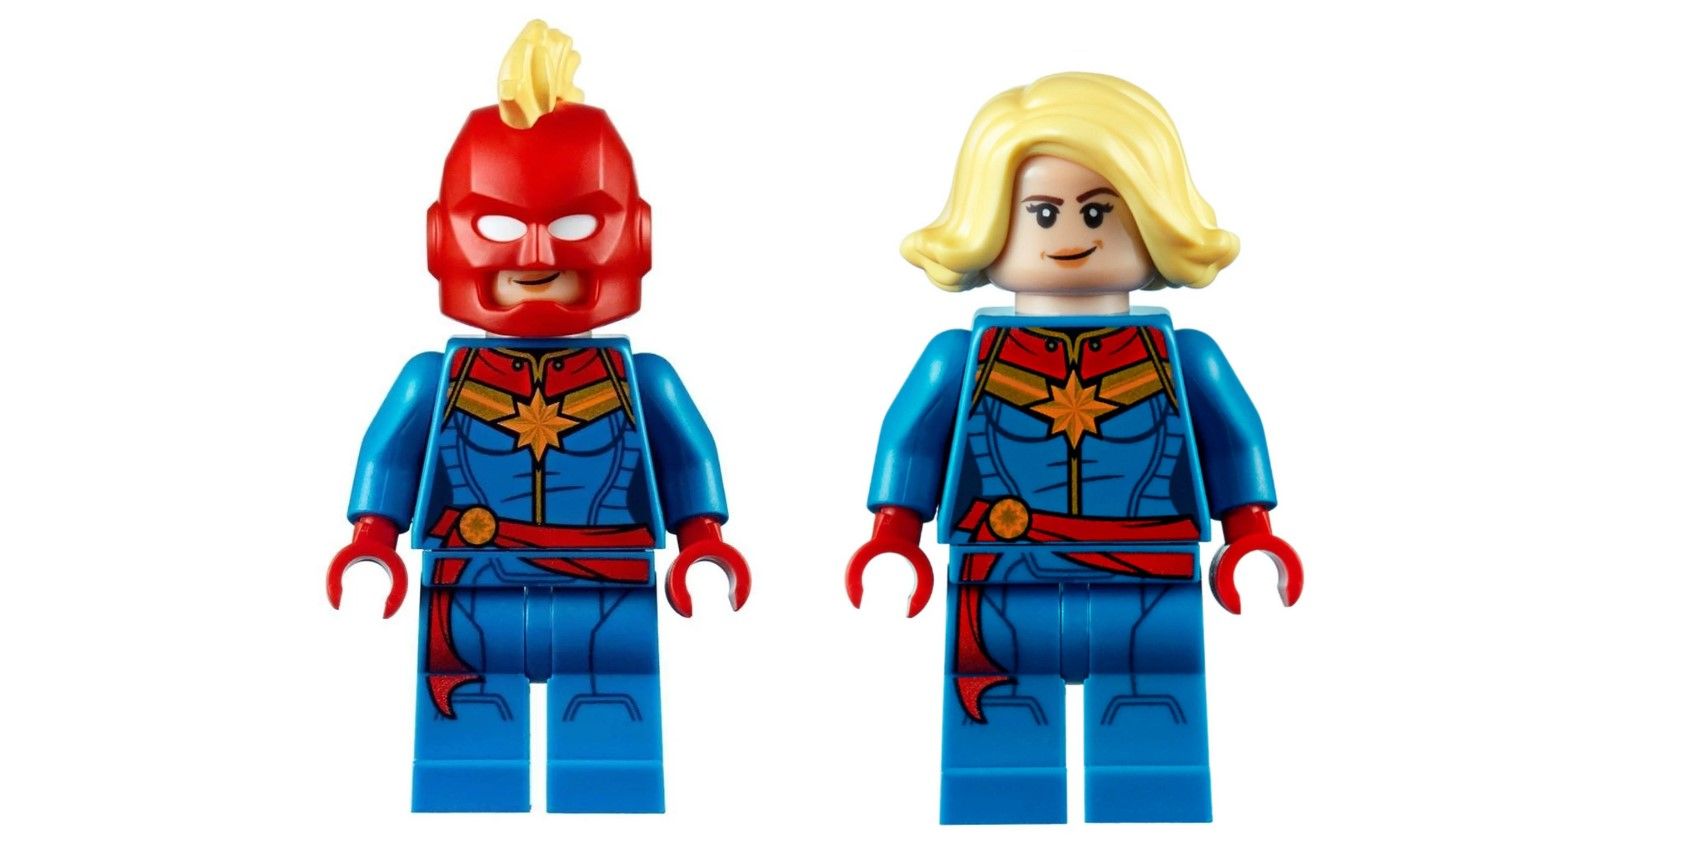 The 10 Best Marvel LEGO Minifigures, Ranked